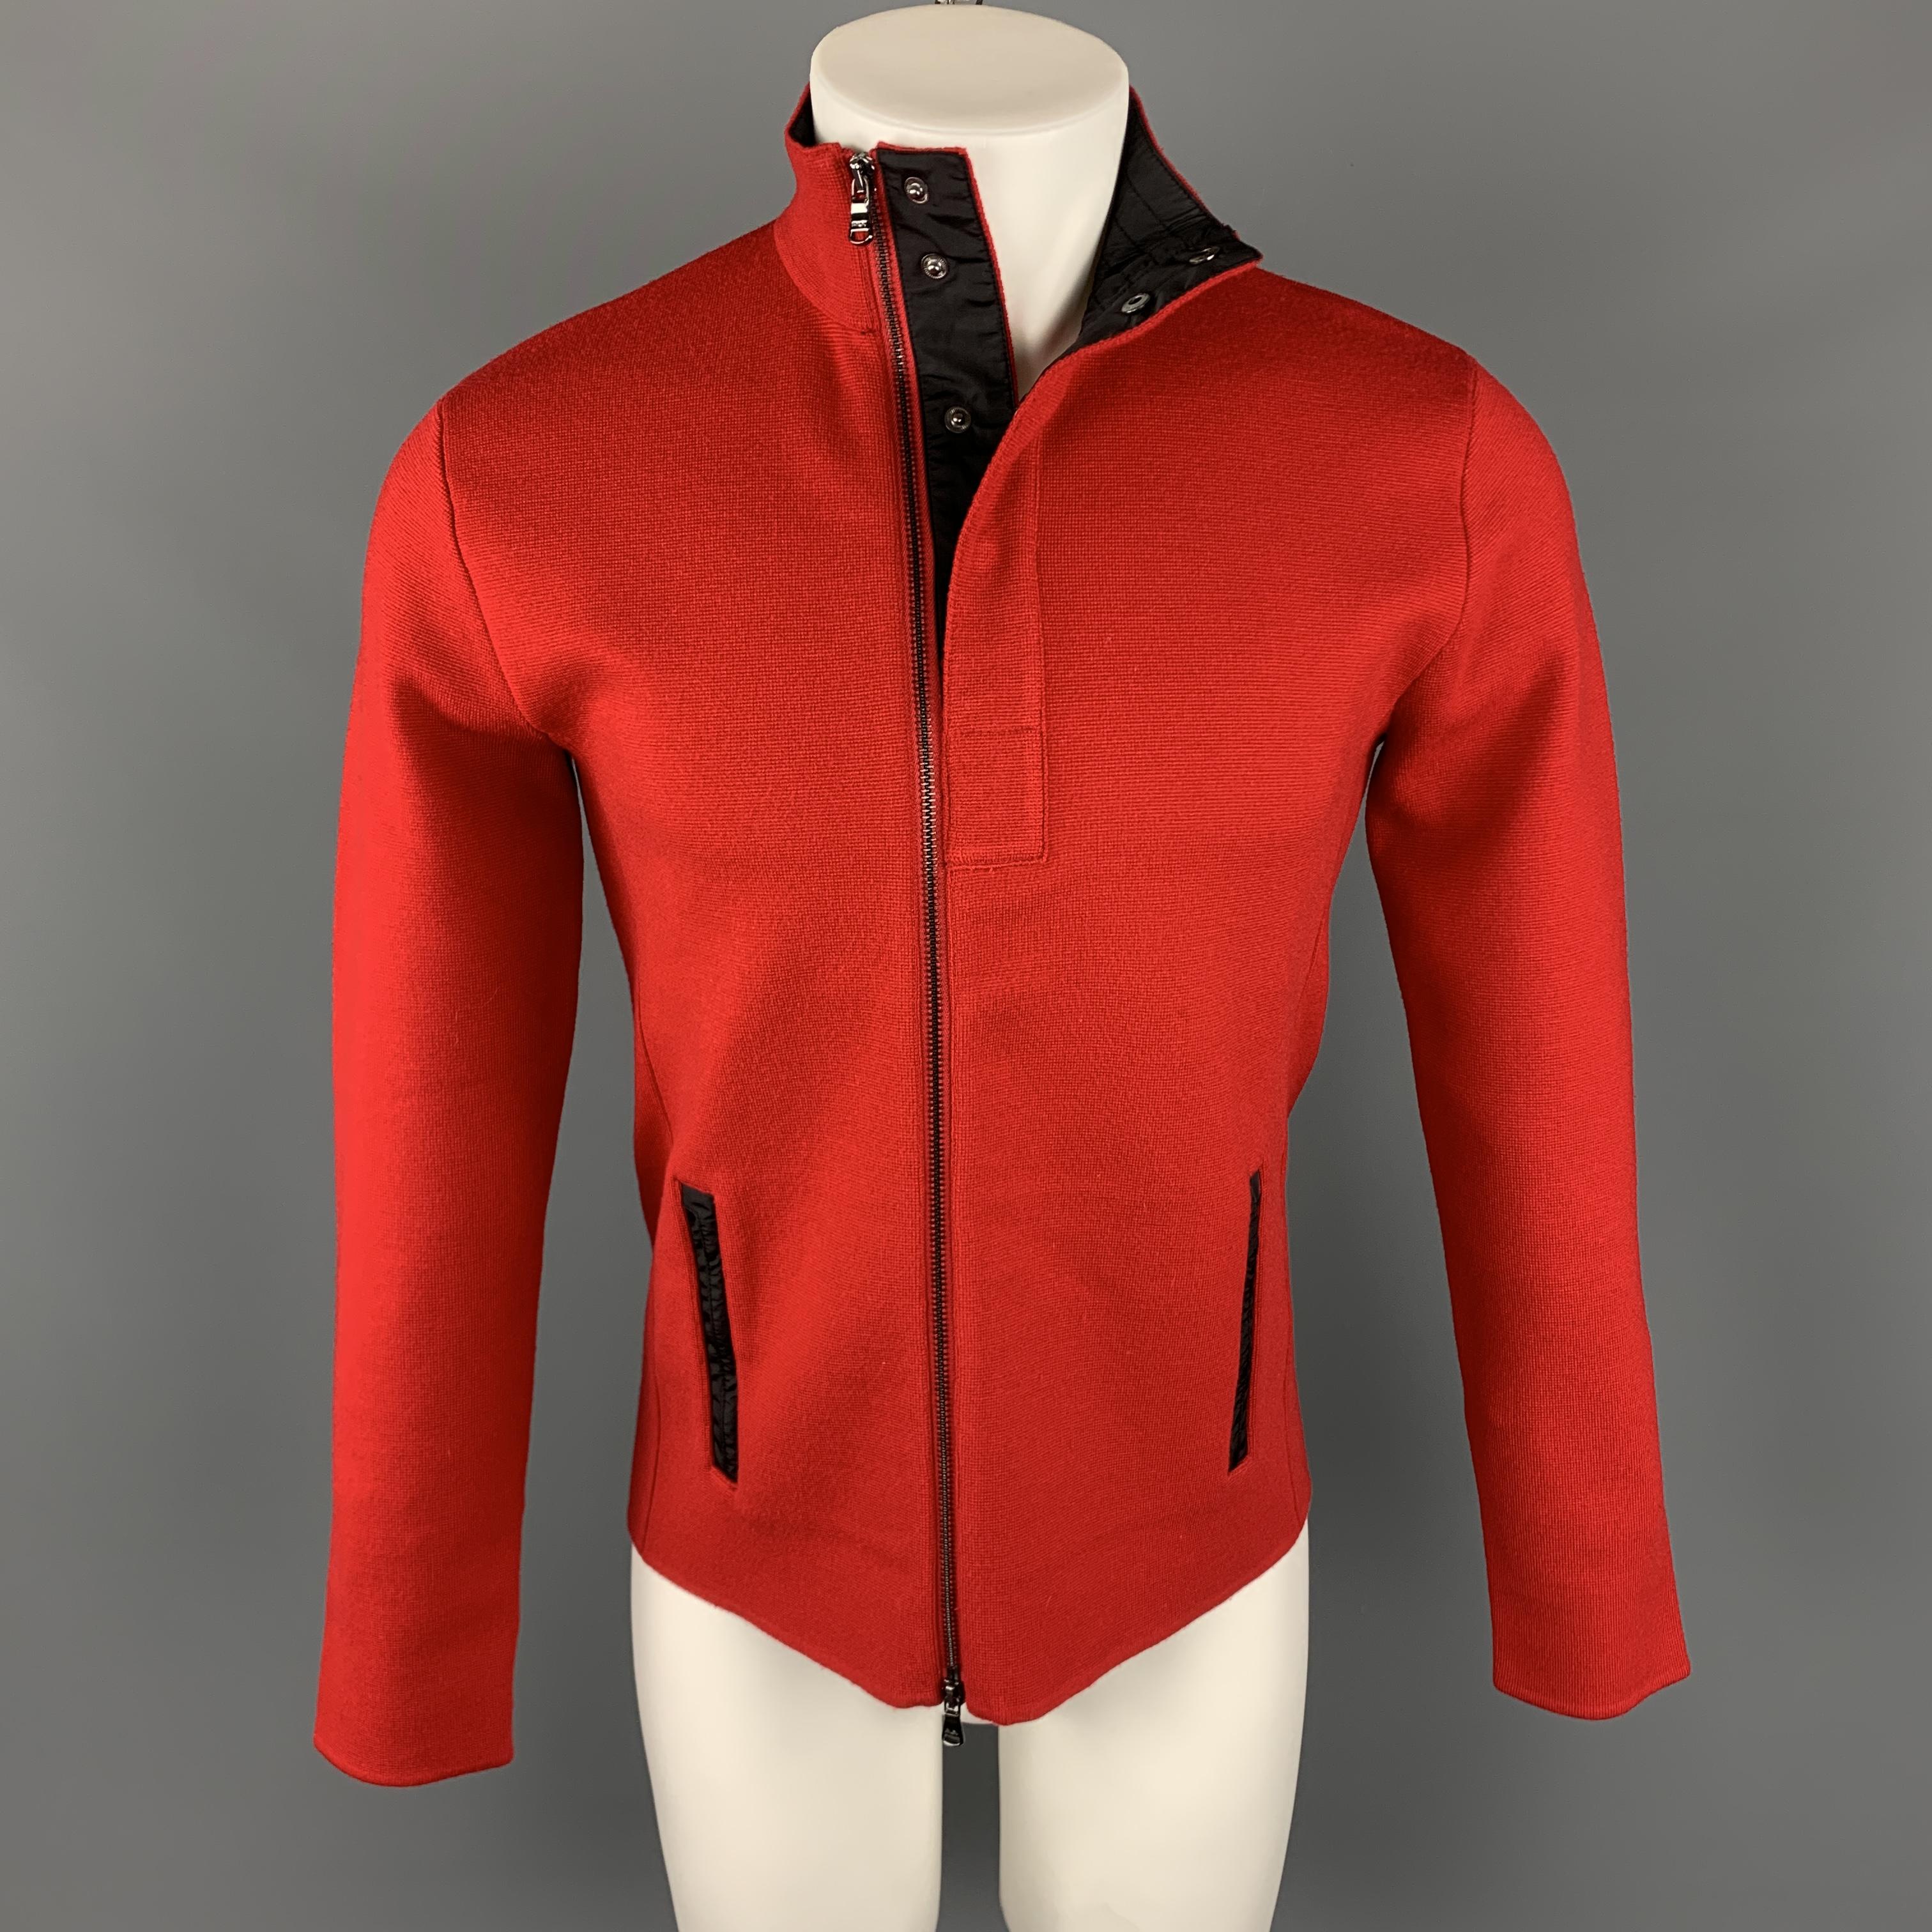 RLX by RALPH LAUREN Jacket comes in a red tone in a solid wool blend material, with a high collar, zip and snaps at closure, zip pockets, and elbow patches. Minor wear, with a light mark at back.
 
Very Good Pre-Owned Condition.
Marked: S
